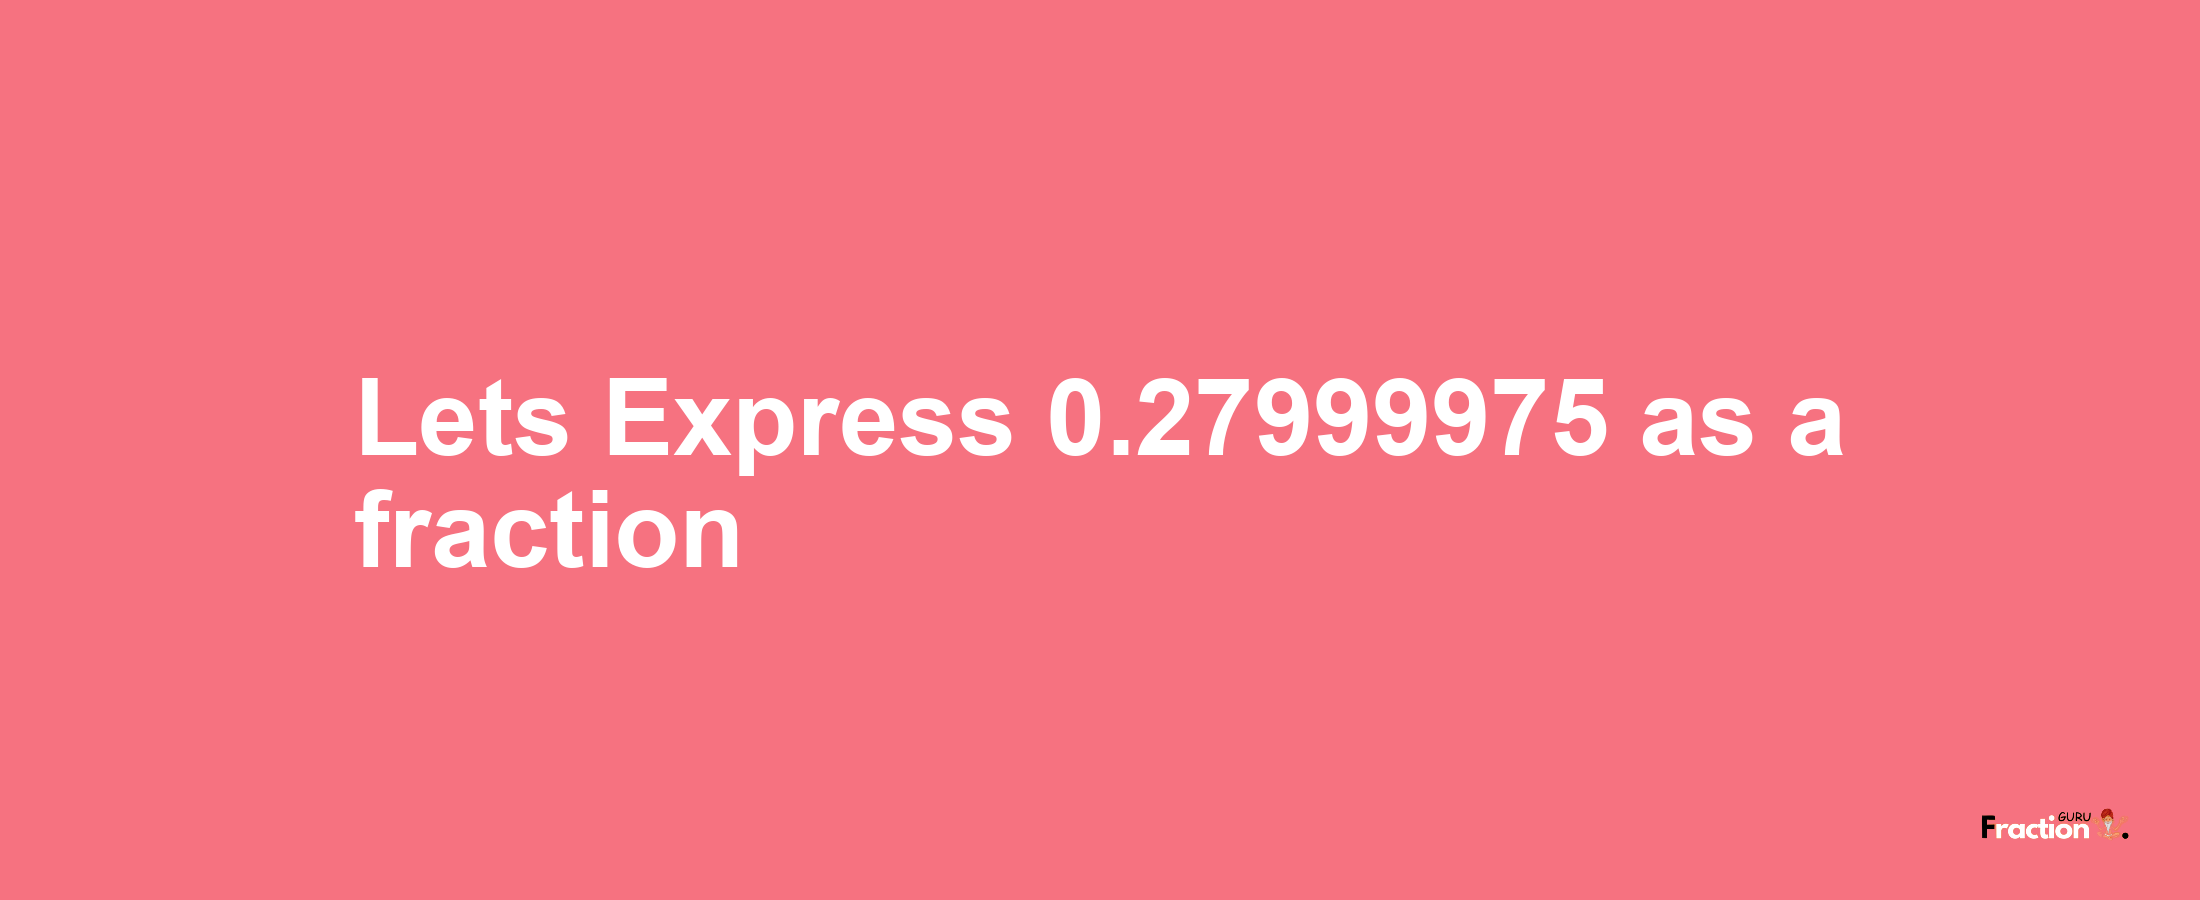 Lets Express 0.27999975 as afraction